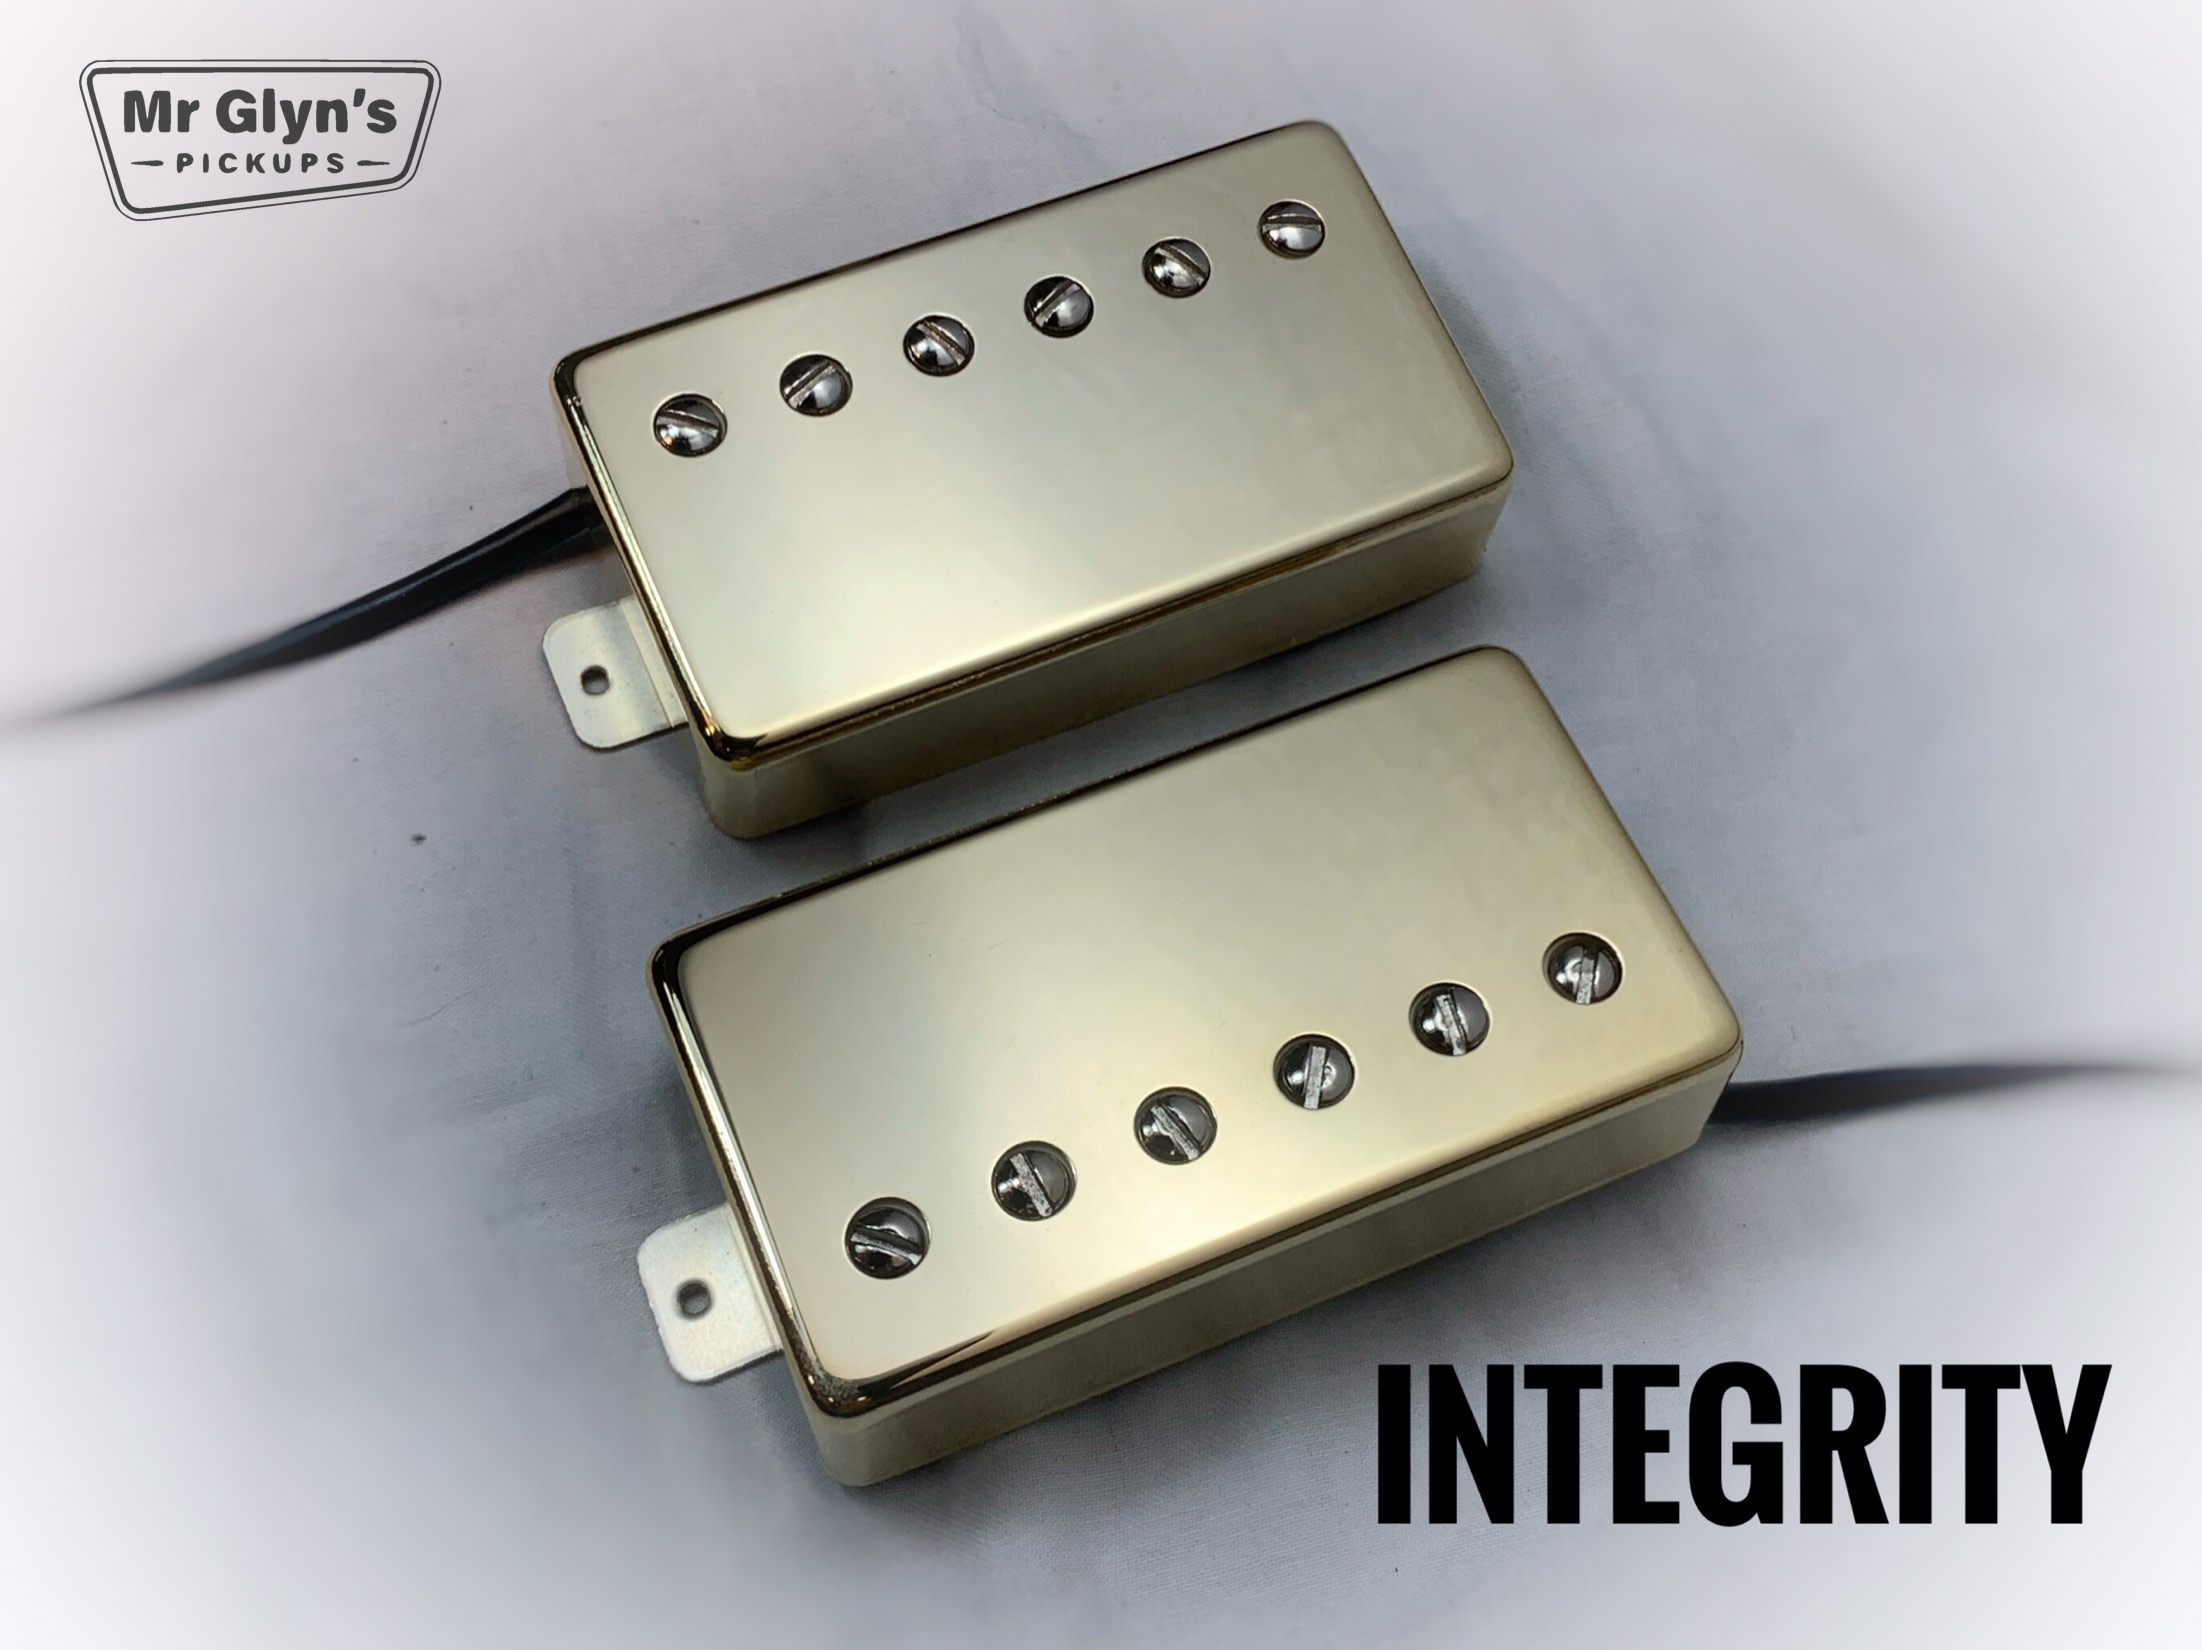 Integrity humbuckers. PAF Alnico 2 vintage voiced pickups